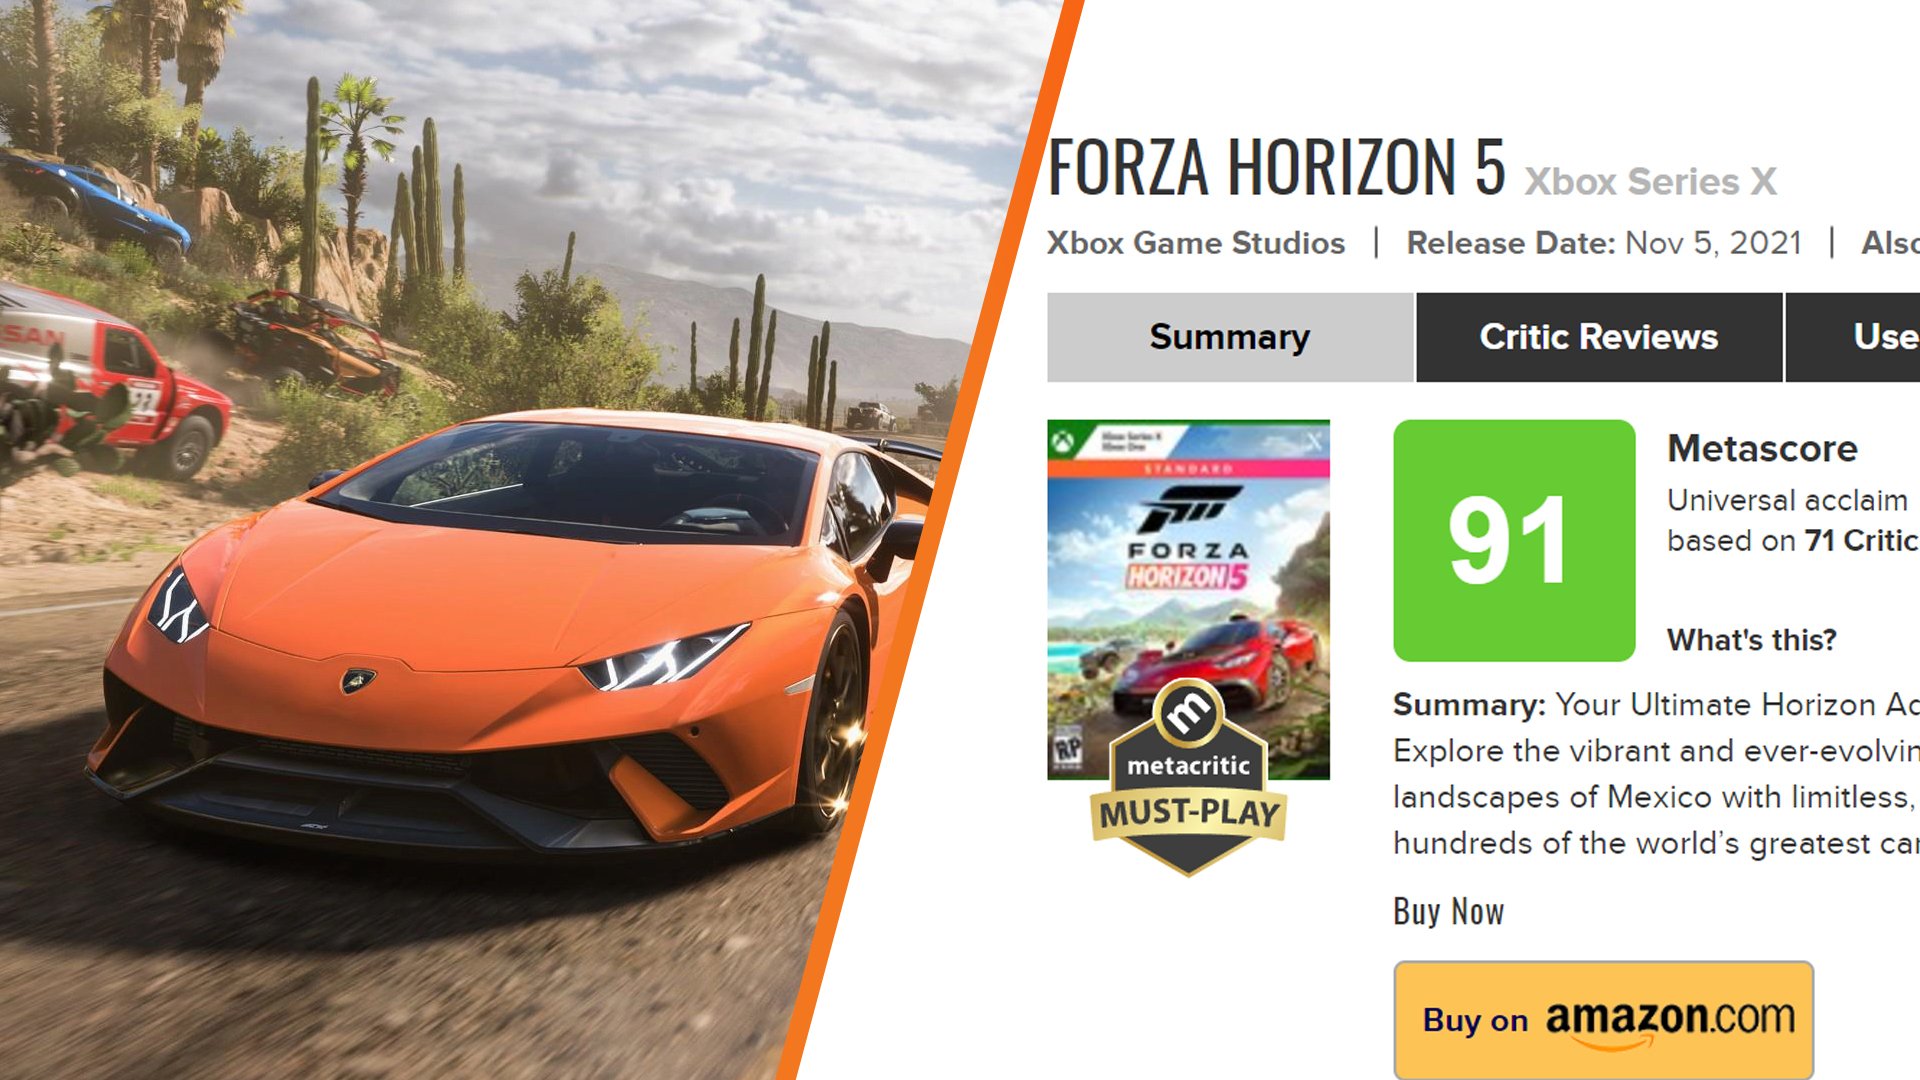 Best steam offers pt.3, Forza Horizon 5 currently has a discount on s